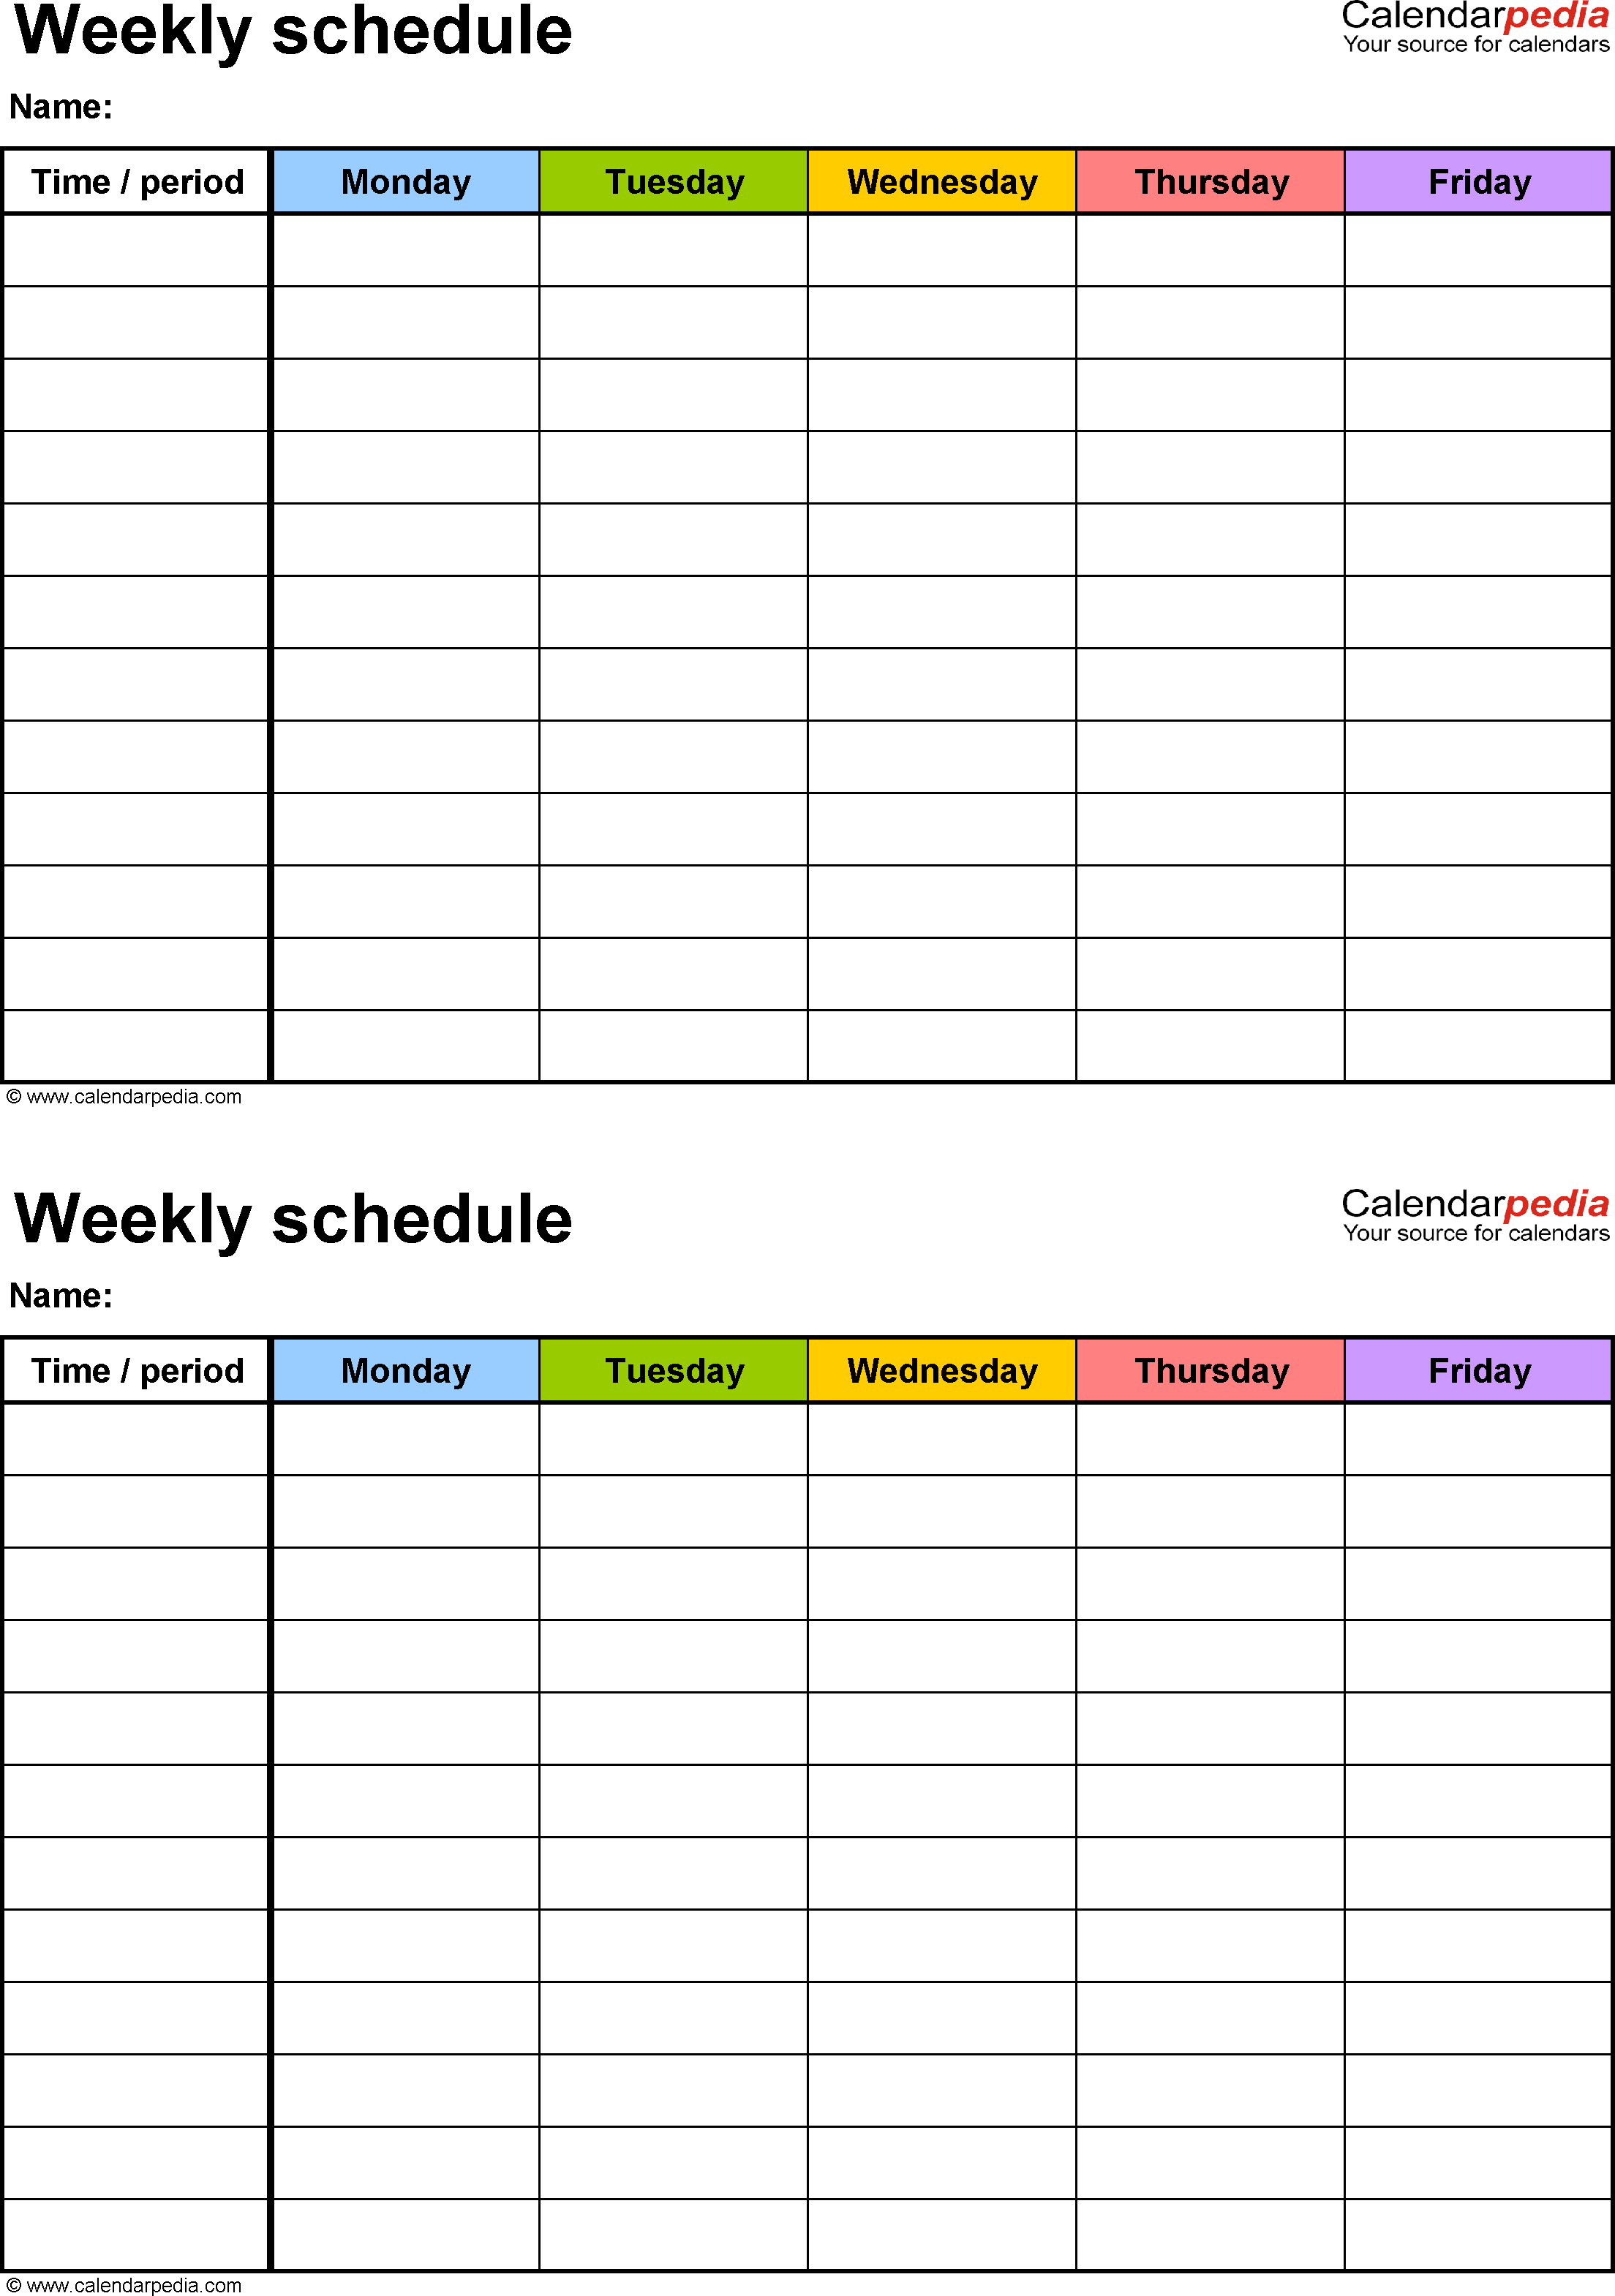 Ms Word Weekly Calendar Template from legaldbol.com